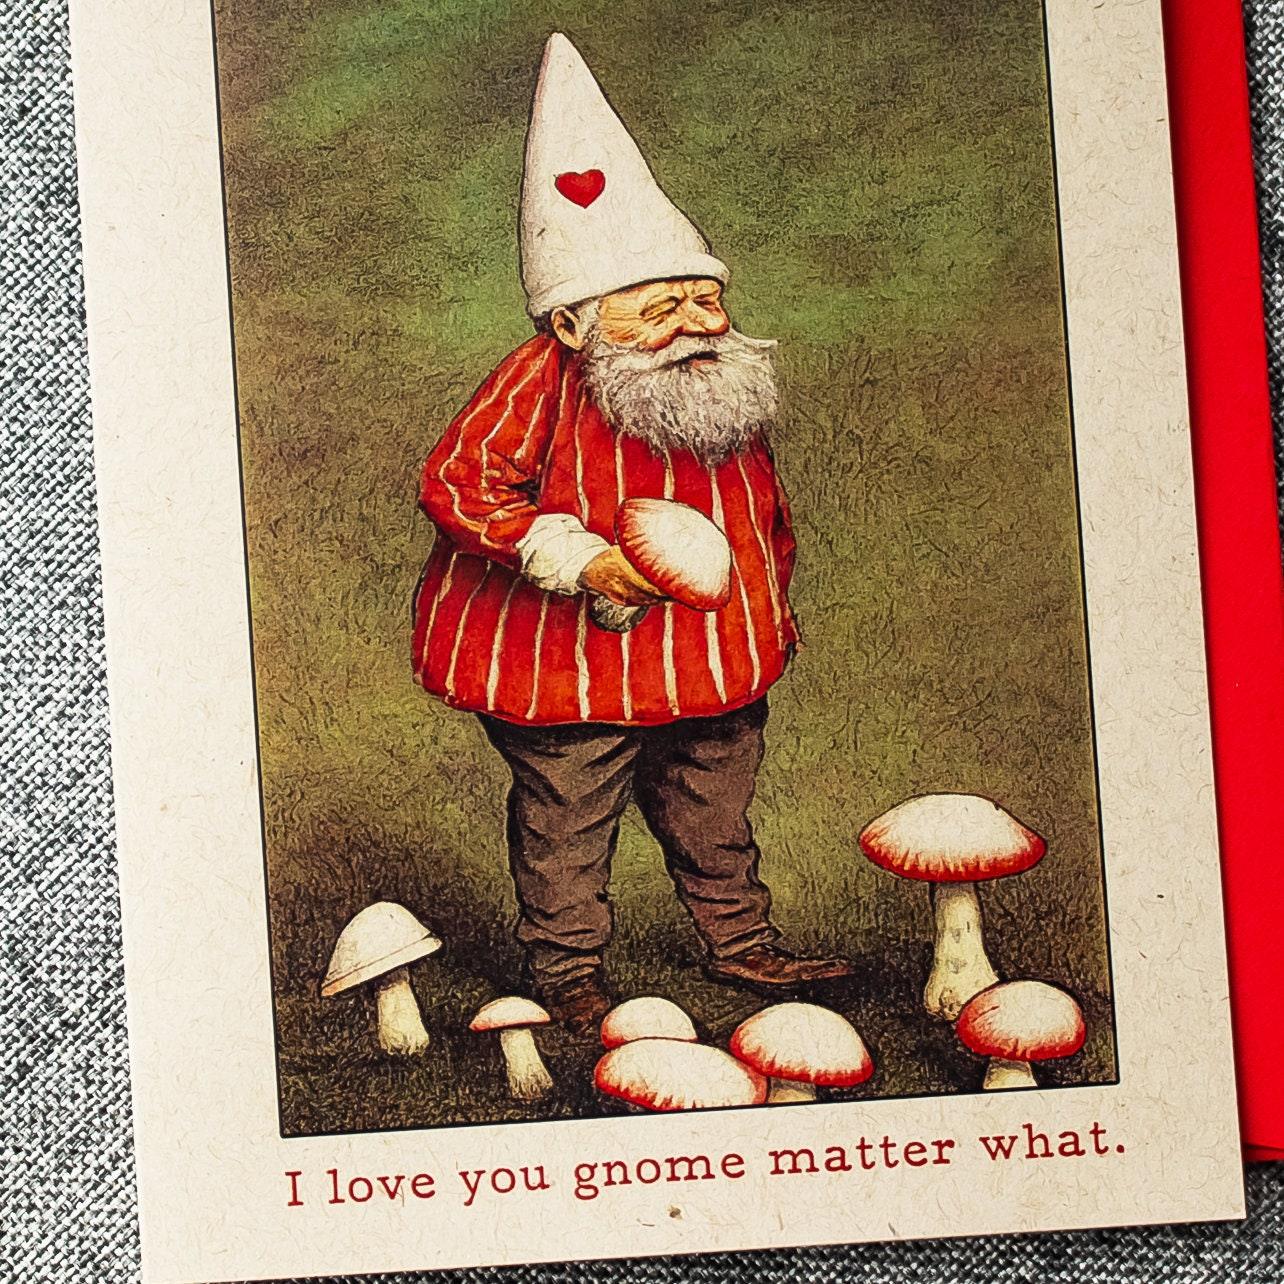 Gnome Valentine's Day Card - I Love You Gnome Matter What - Vintage Gnome and Mushroom - Punny Love Card